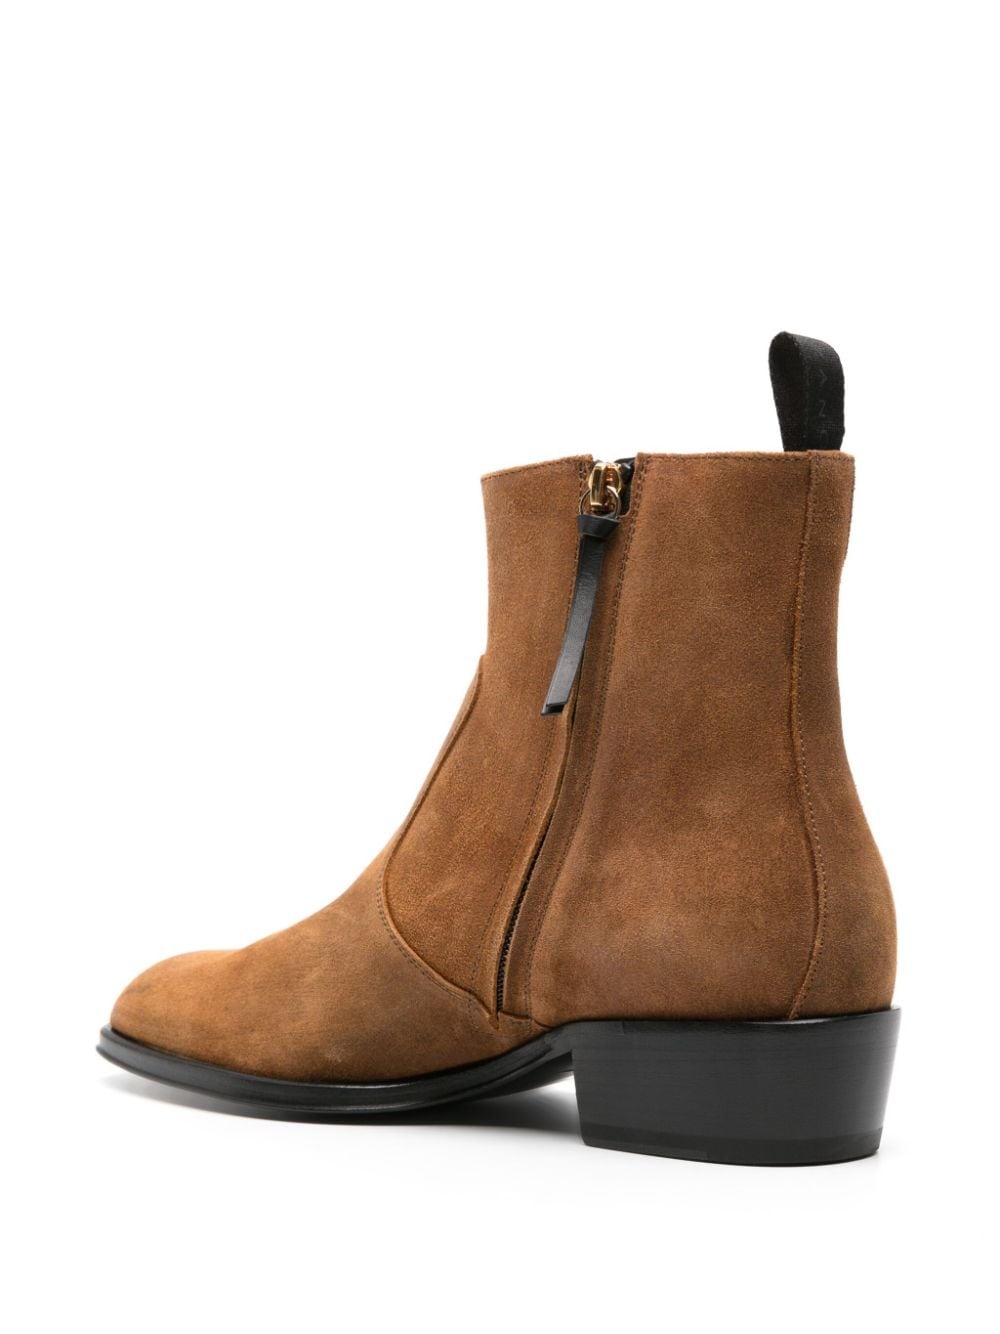 40mm suede ankle boots - 3